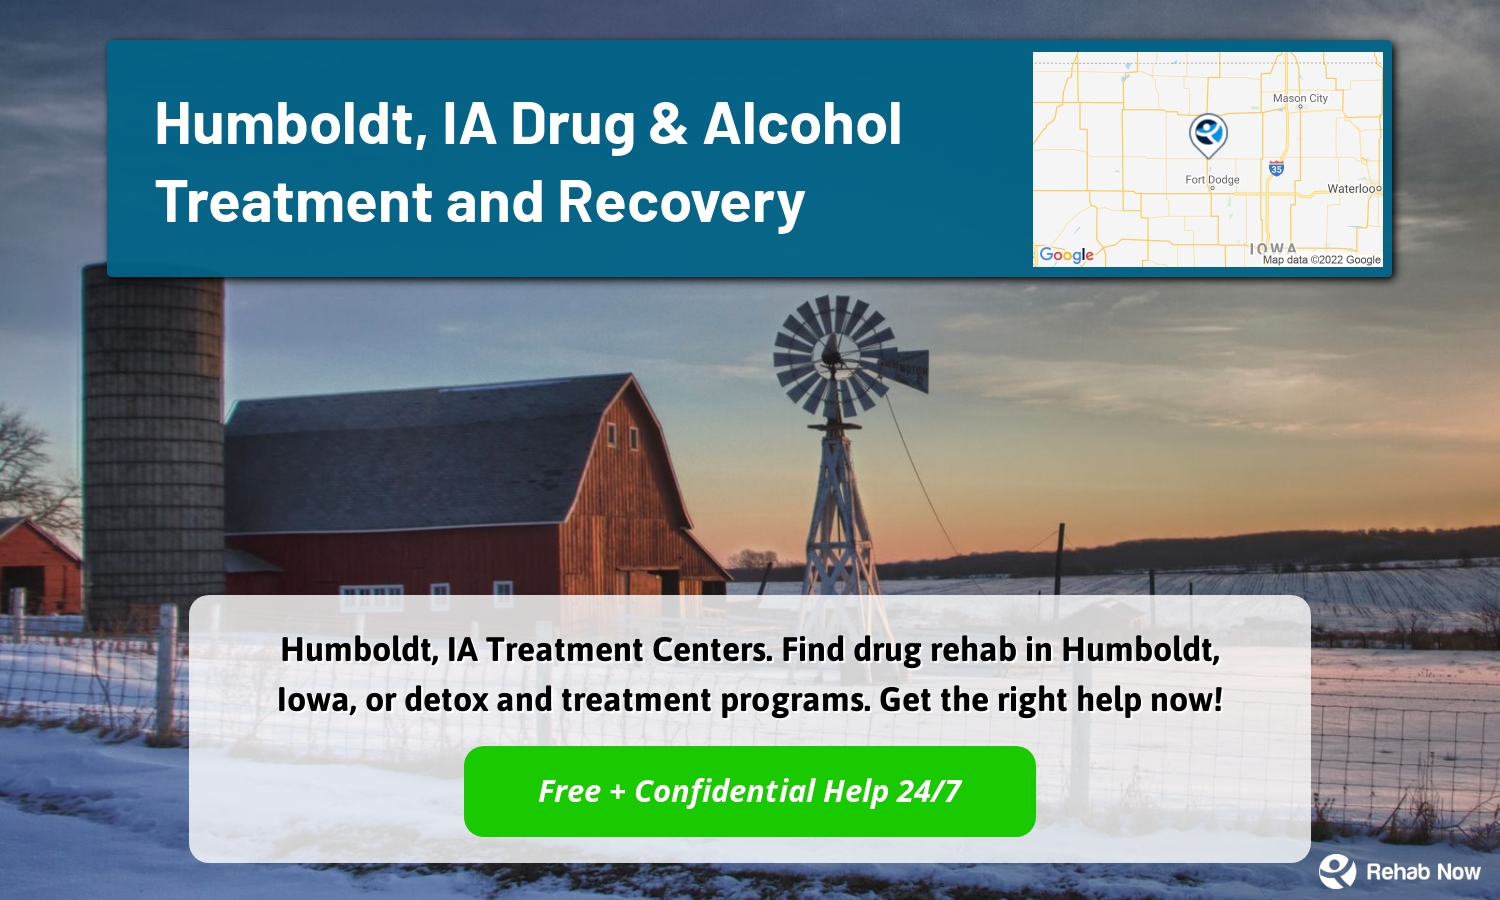 Humboldt, IA Treatment Centers. Find drug rehab in Humboldt, Iowa, or detox and treatment programs. Get the right help now!